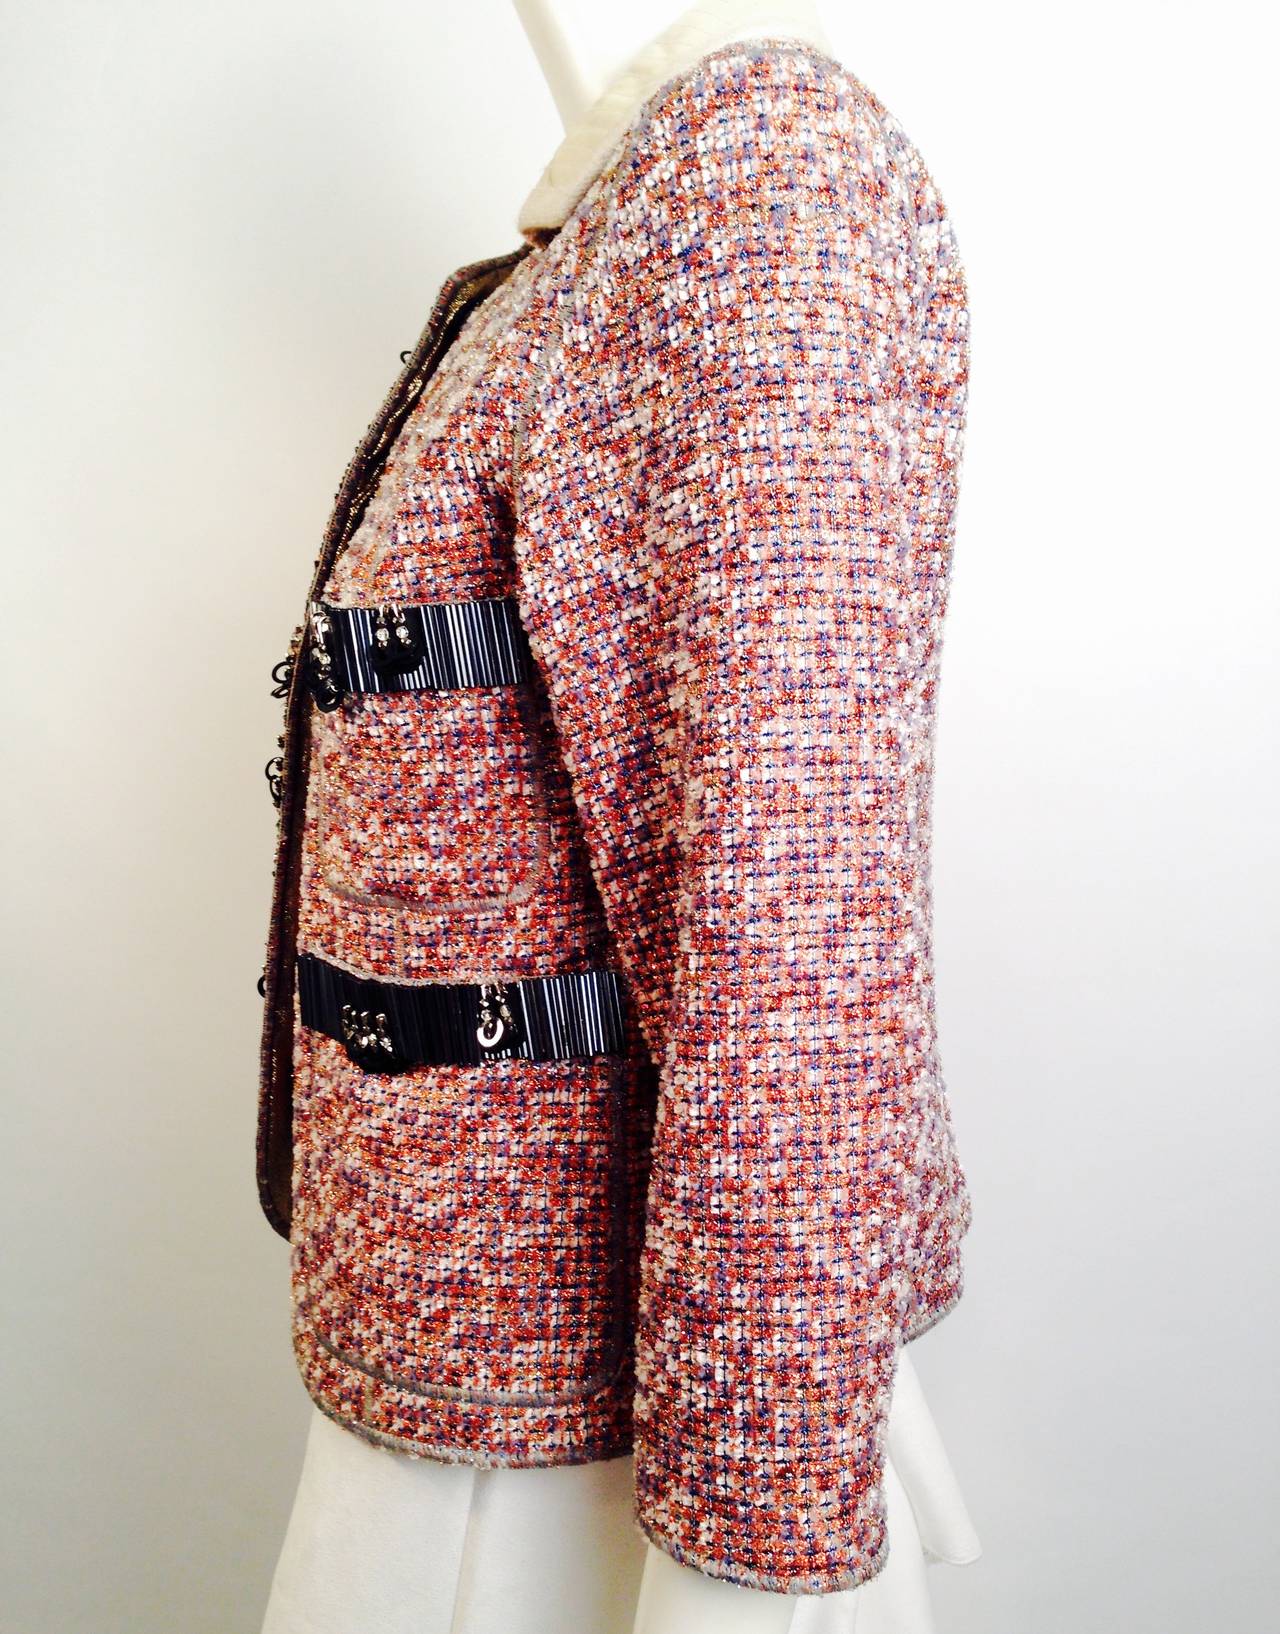 Marc Jacobs For Bergdorf Goodman Tweed Jacket With Glass Beads In New Condition For Sale In Palm Beach, FL